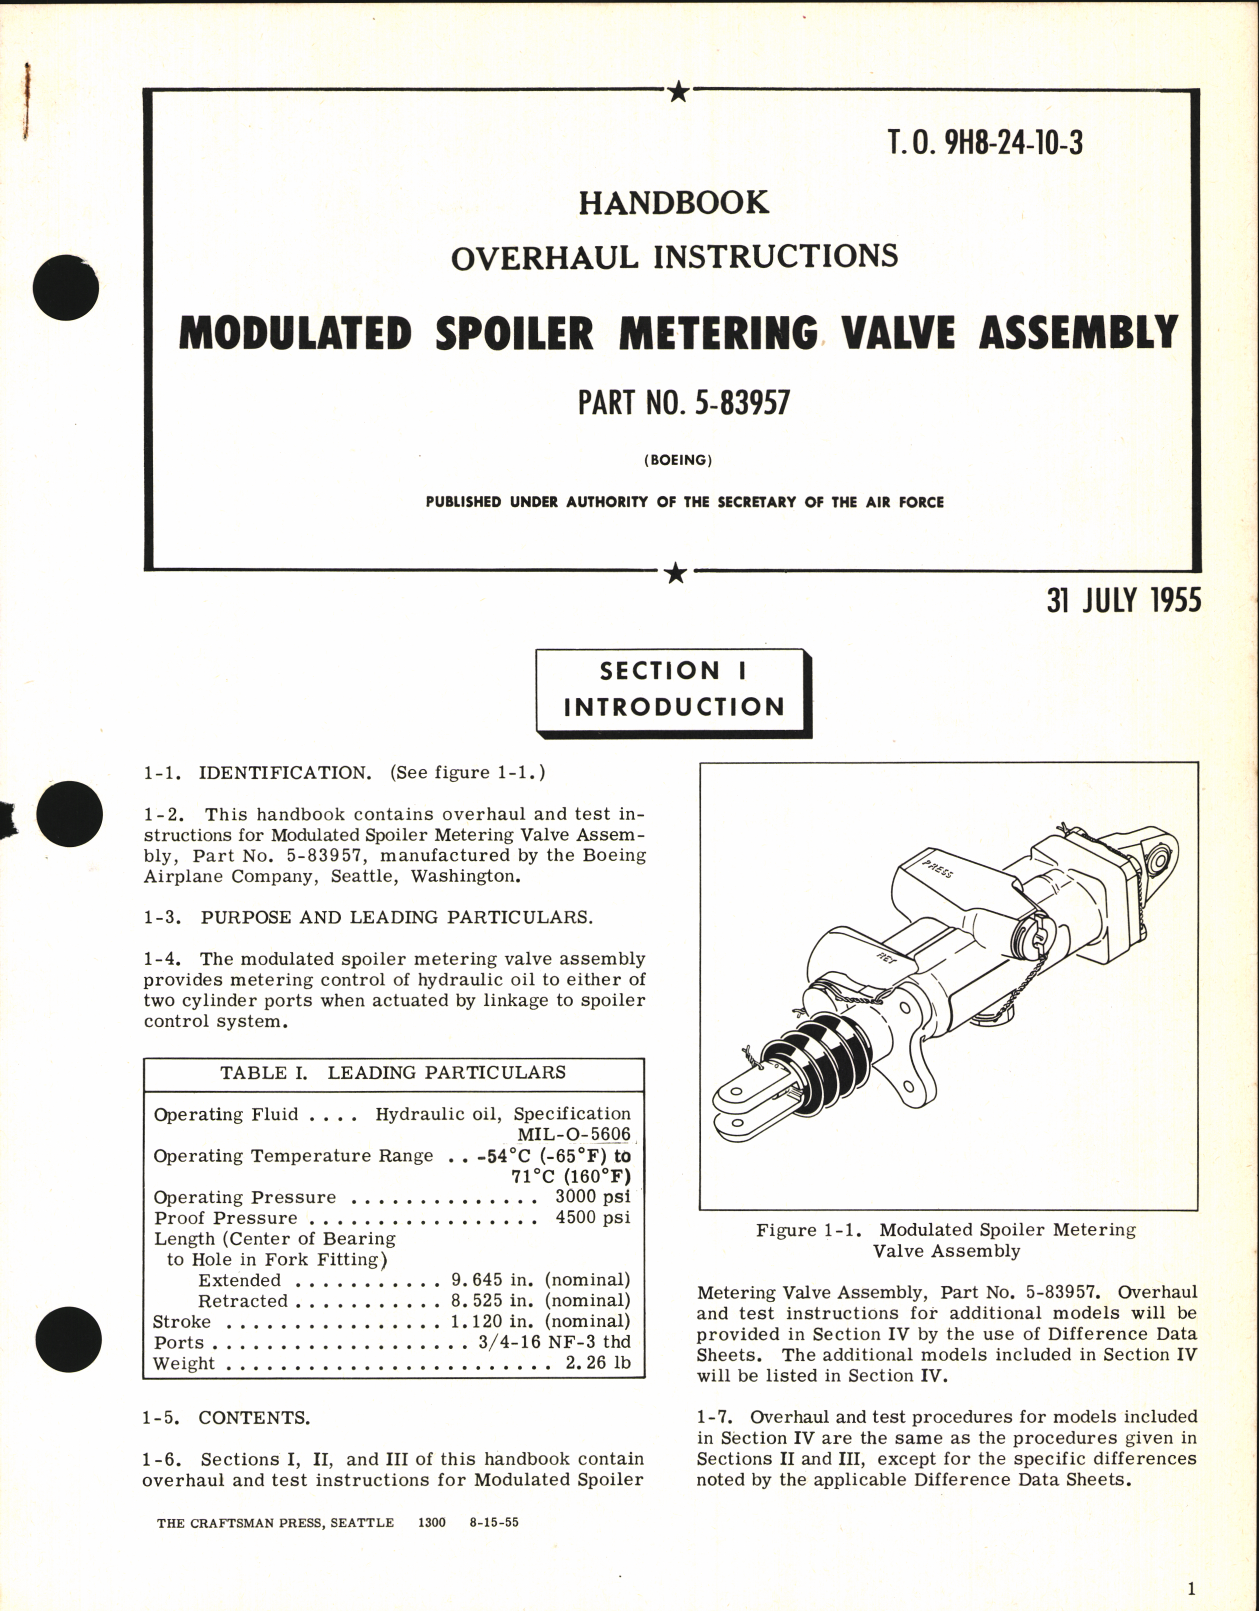 Sample page 1 from AirCorps Library document: Handbook of Overhaul Instructions for Modulated Spoiler Metering Valve Assembly Part No. 5-83957